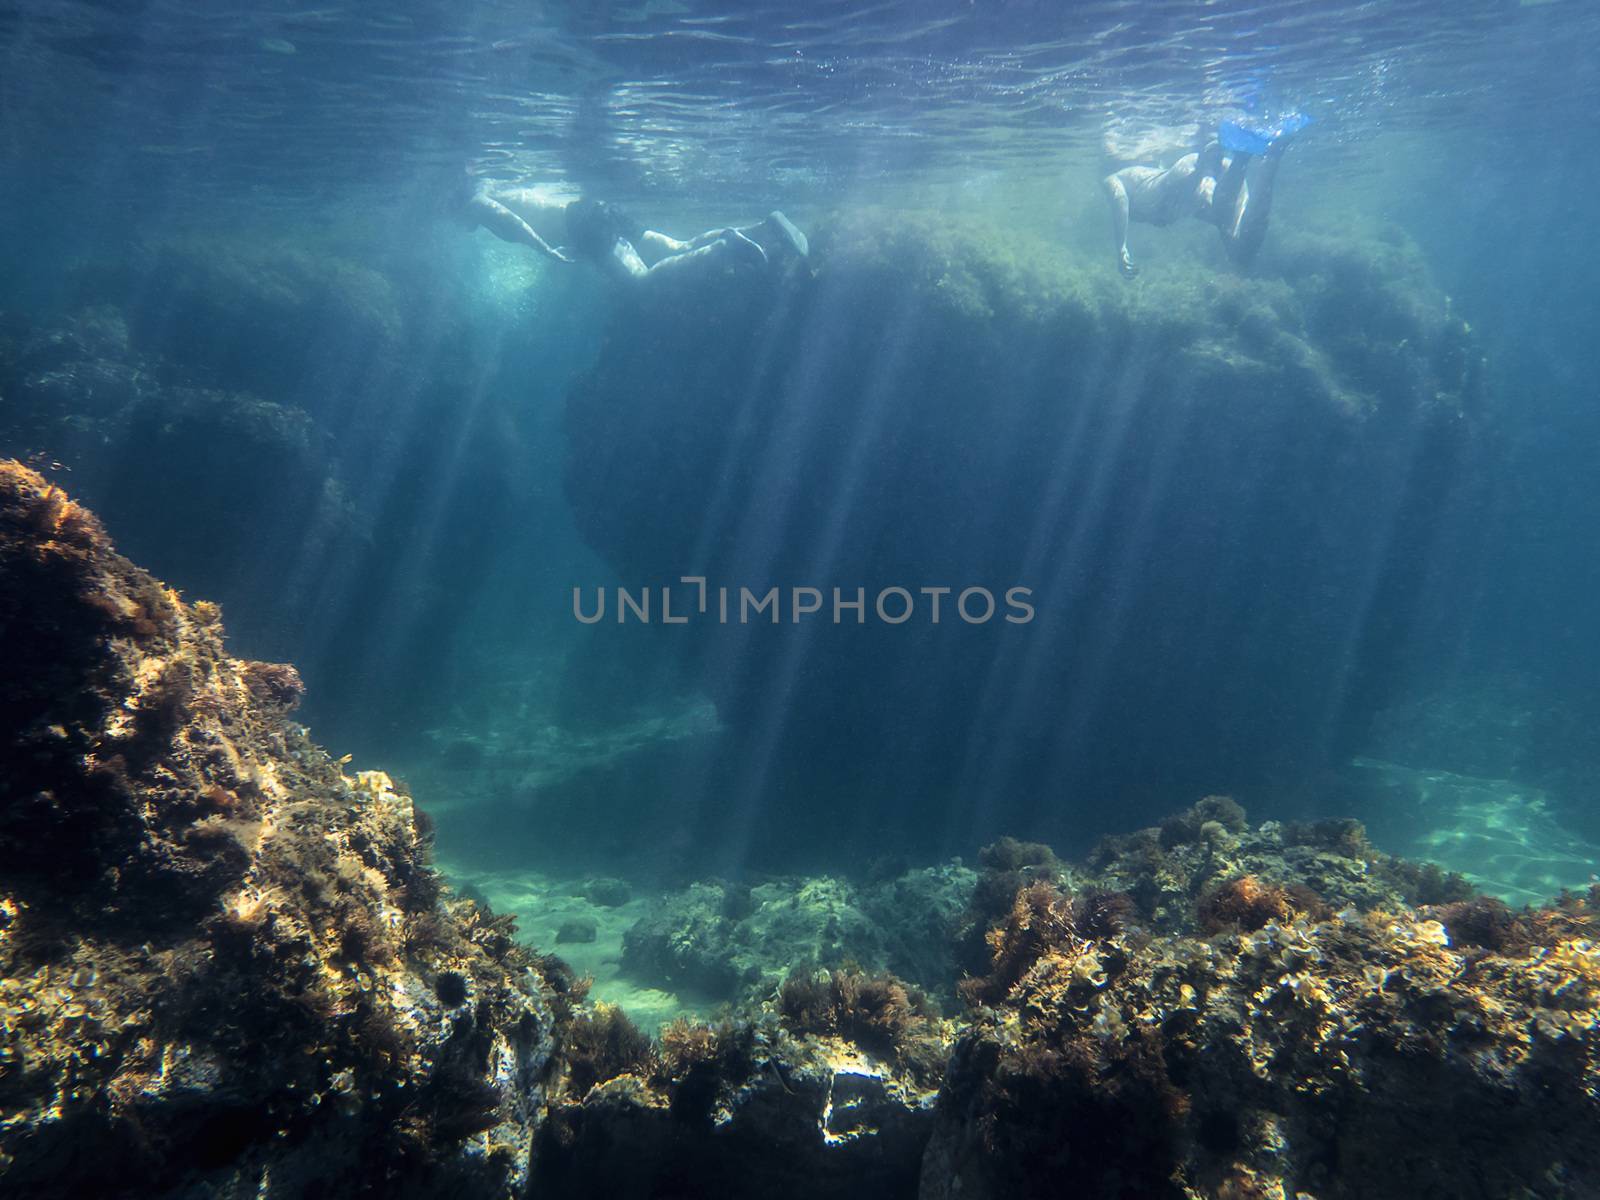 Two people diving near a huge rock seen from under water. Sun rays enter the water illuminating the bottom of sand and rocks